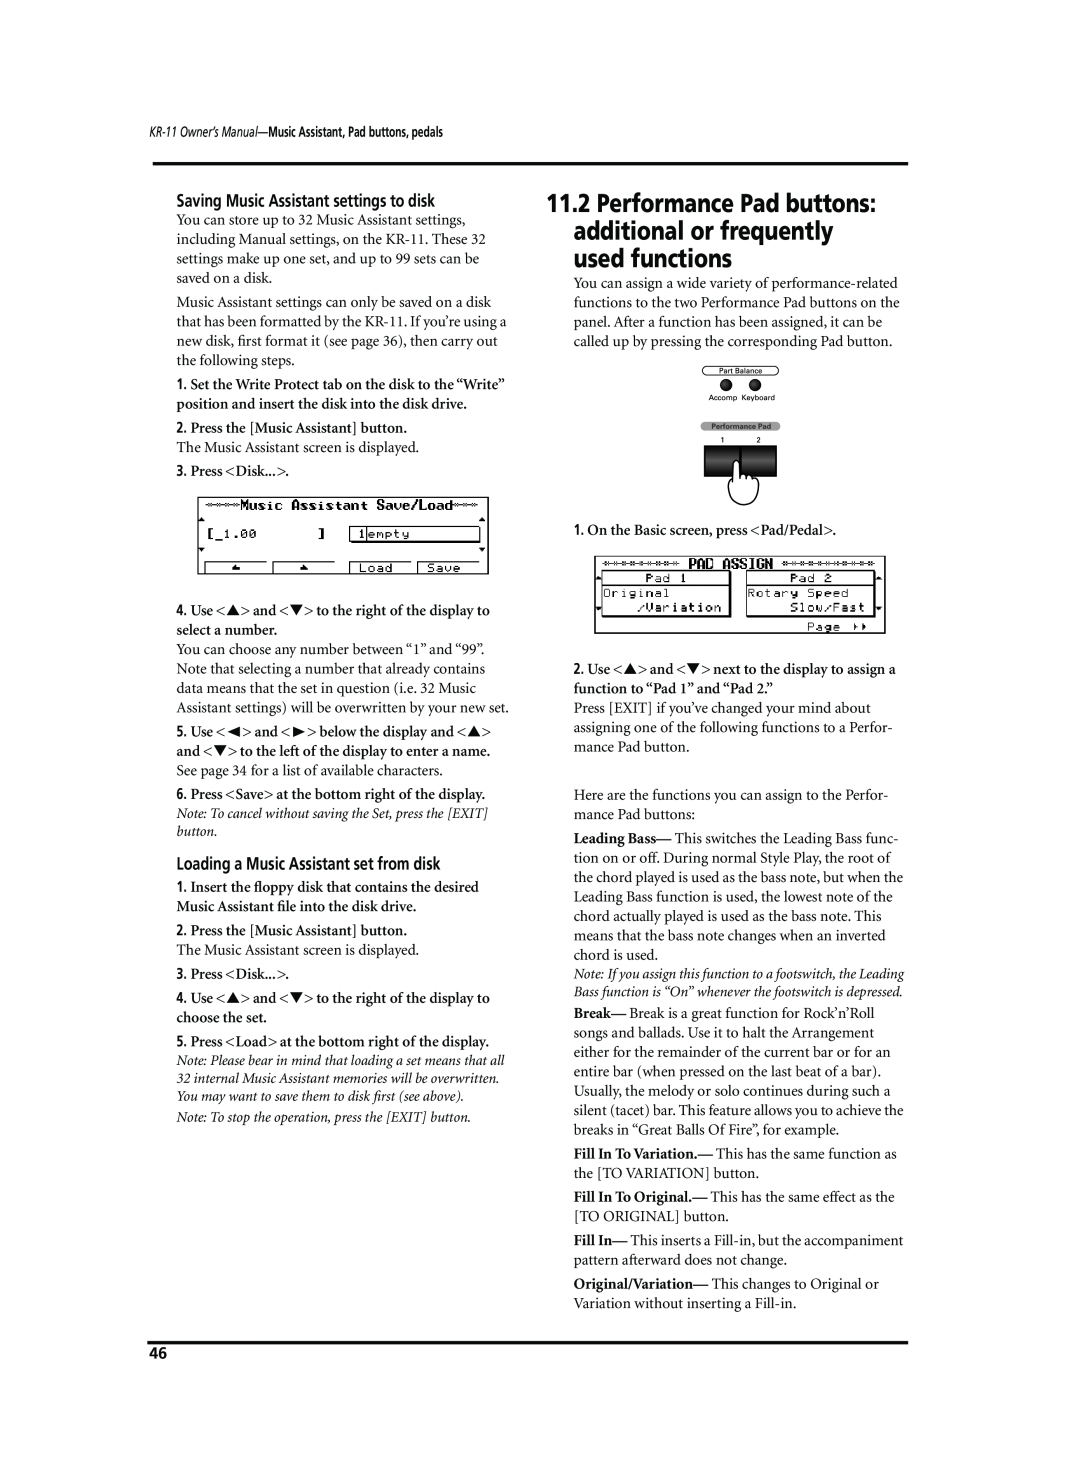 Roland KR-11 owner manual Saving Music Assistant settings to disk, Loading a Music Assistant set from disk 